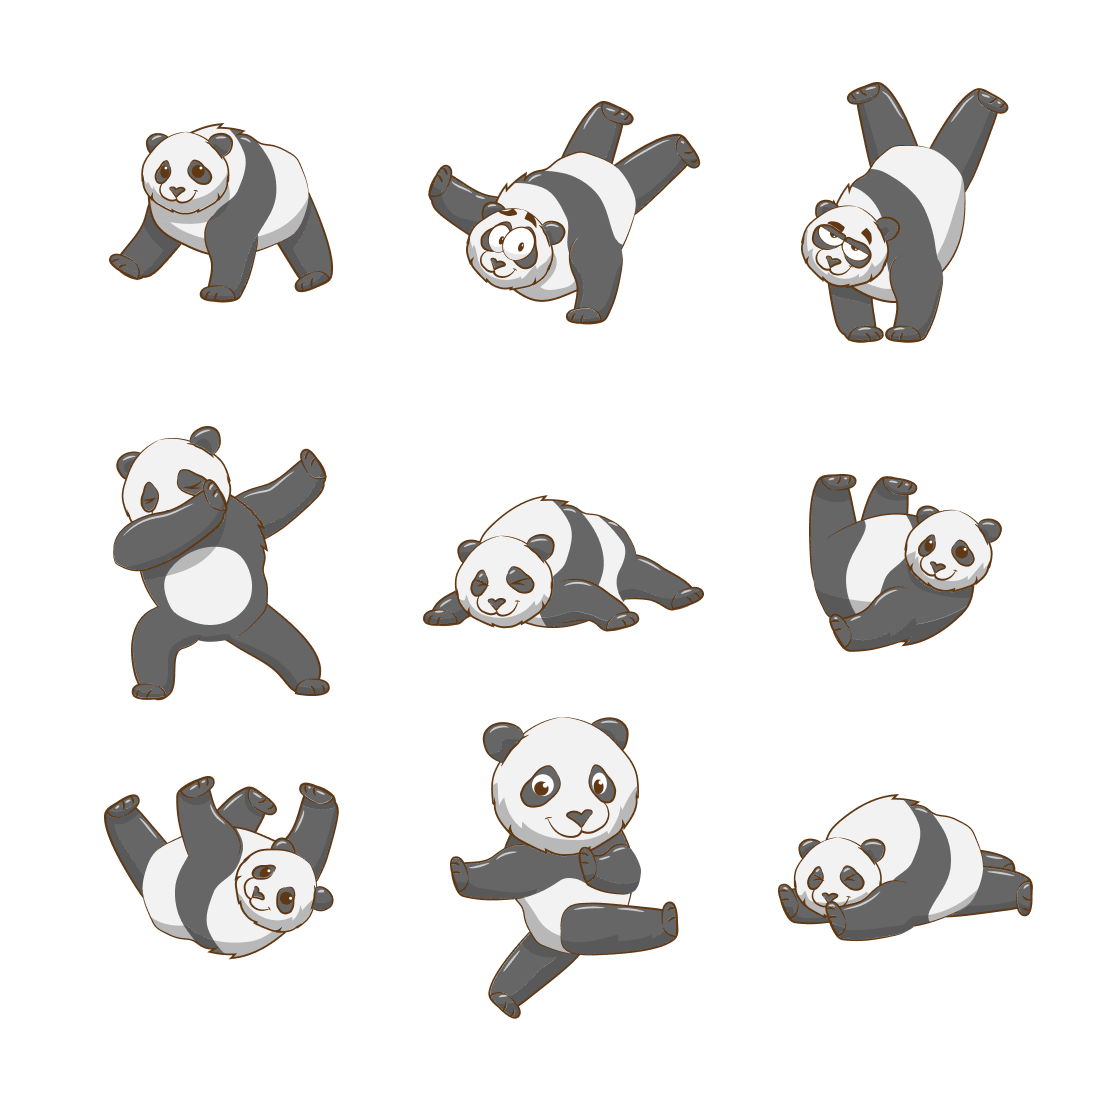 Bunch of pandas that are laying down.